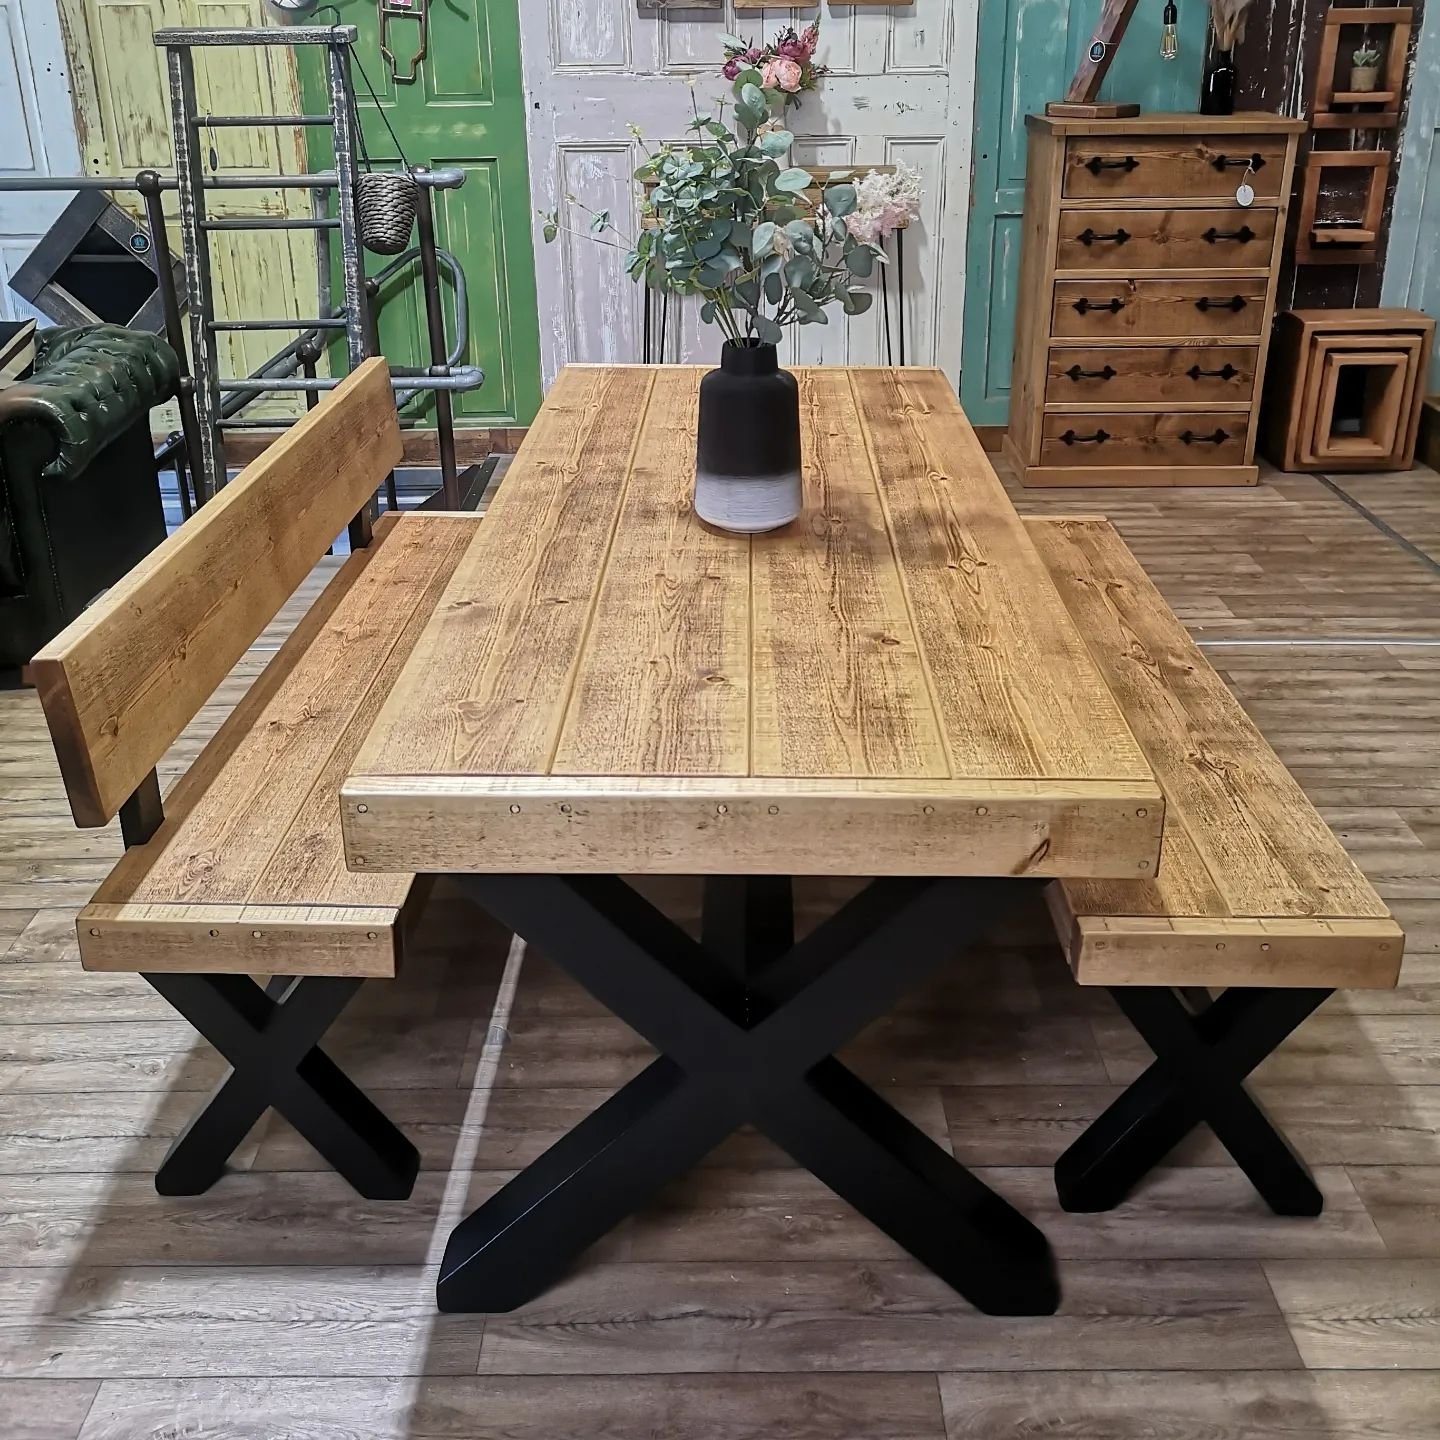 The Bolton Banquet 2m Dining Set in Medium Oak &amp; Pitch Black Solid

#diningroom #diningtable #diningbench #modernrusticdecor #cleanrustic #homestyling #homerenovation #handmade #homesweethome #instahomewales #homeinspo #instahome #rusticfarmhouse